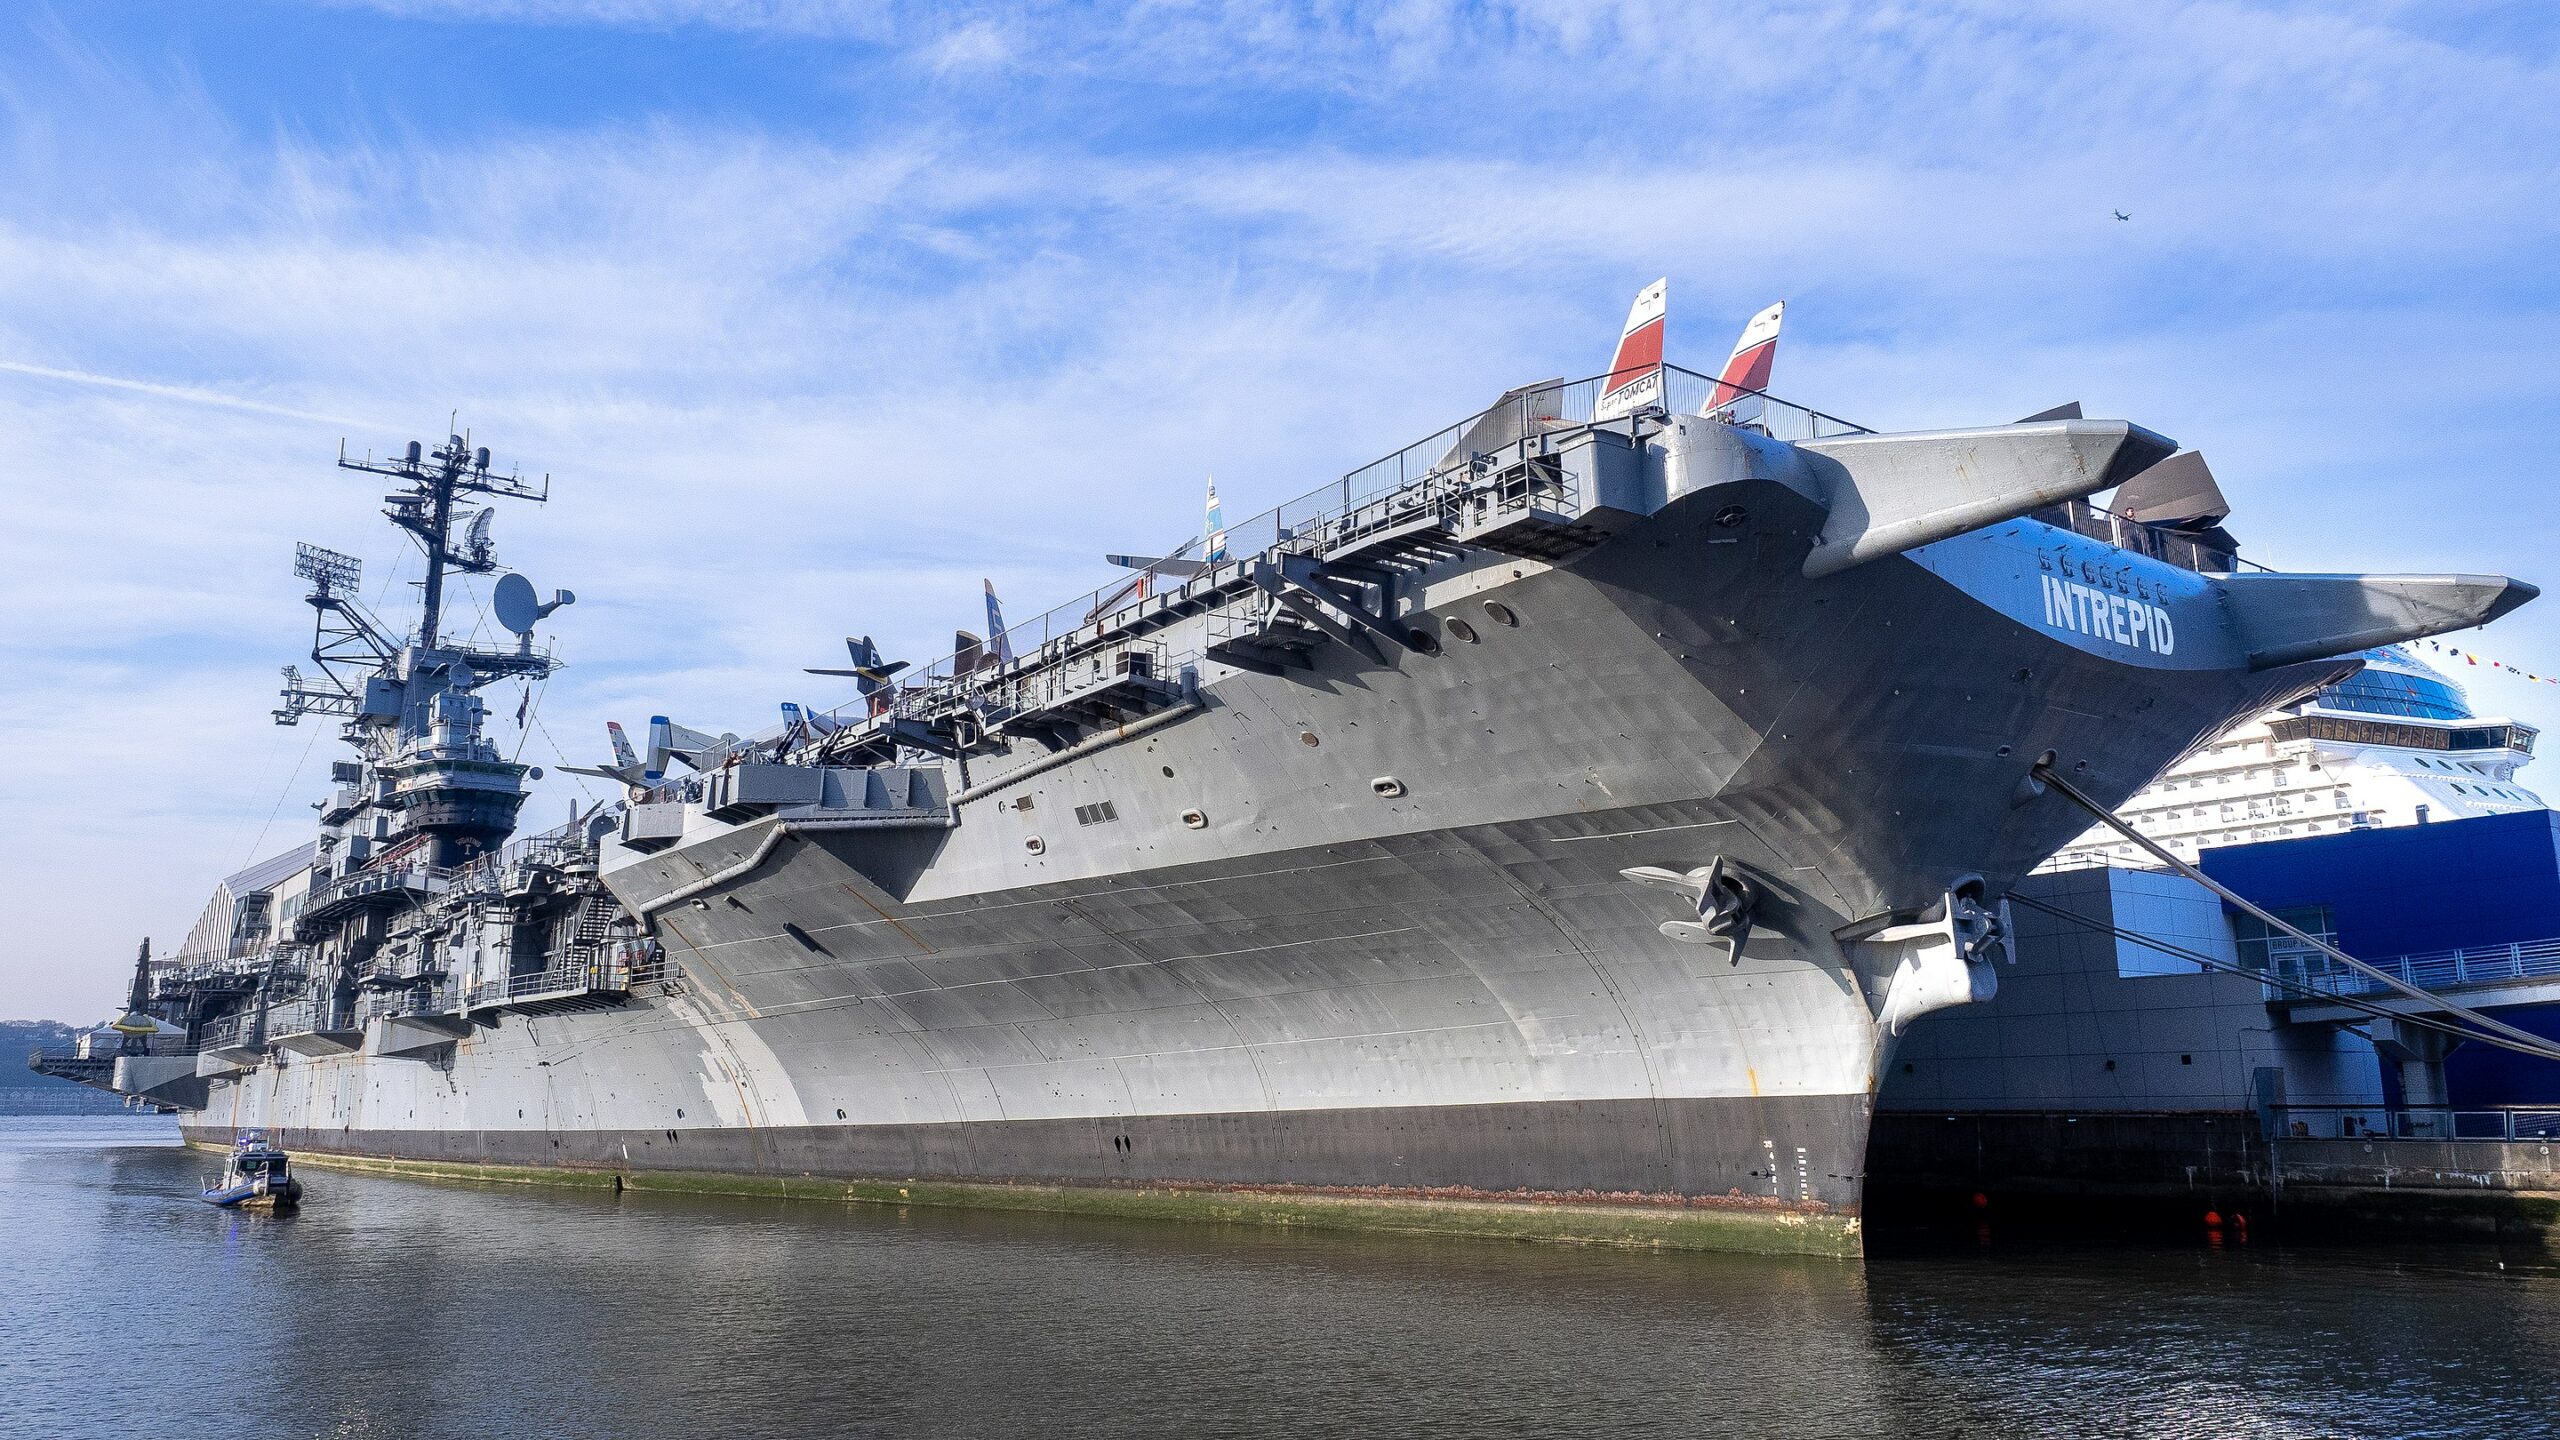 Introducing the Intrepid Museum's New Look